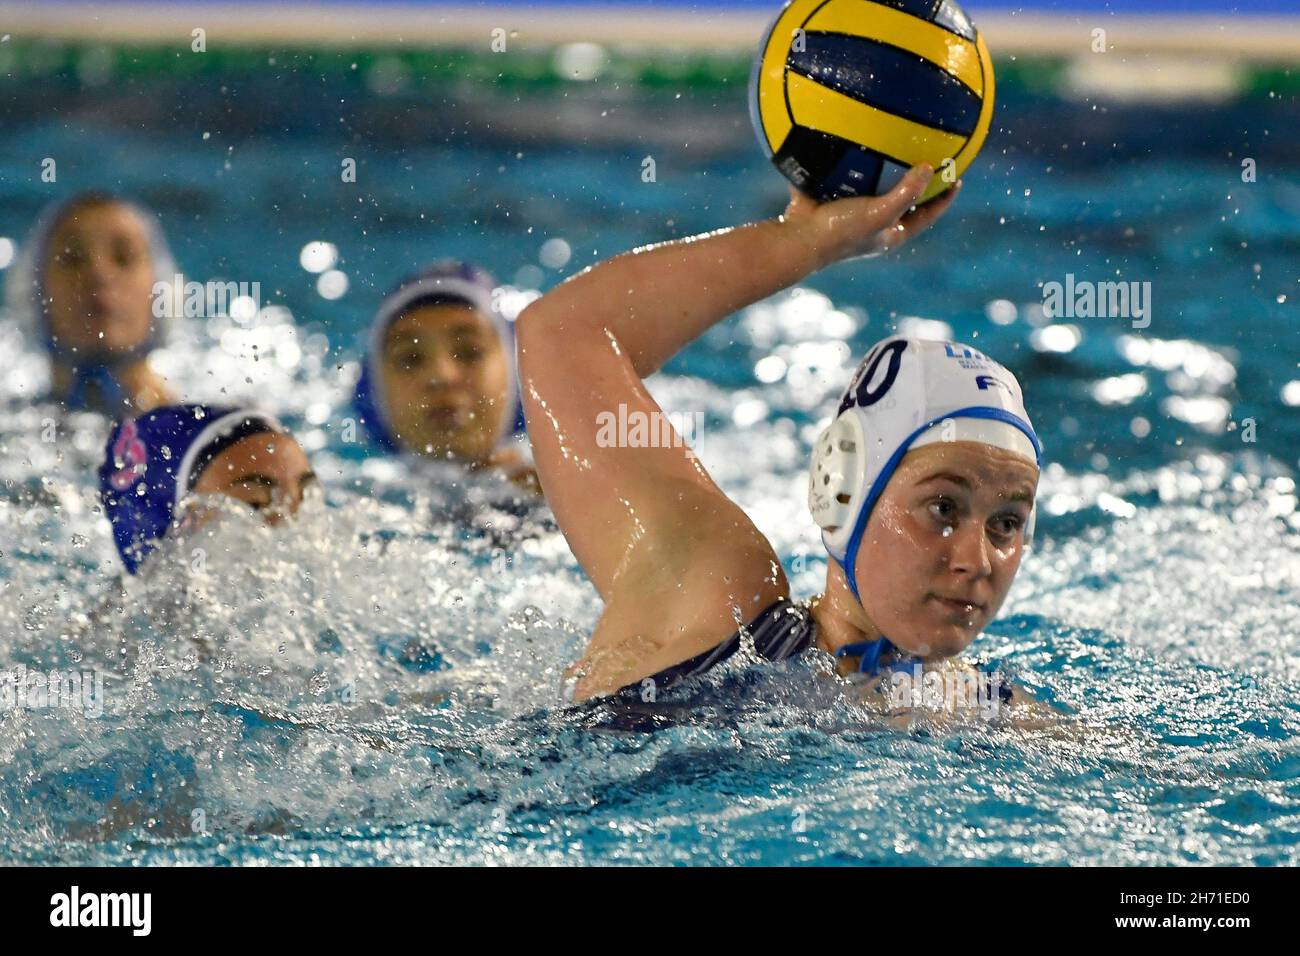 (11/18/2021) Daniela VOMASTKOVA of Lille UC (FRA)  in action during the Waterpolo Euro League Women, Group B, Day 1 between Lille UC and Sirens Malta at Polo Natatorio, 18th November, 2021 in Rome, Italy. (Photo by Domenico Cippitelli/Pacific Press/Sipa USA) Stock Photo